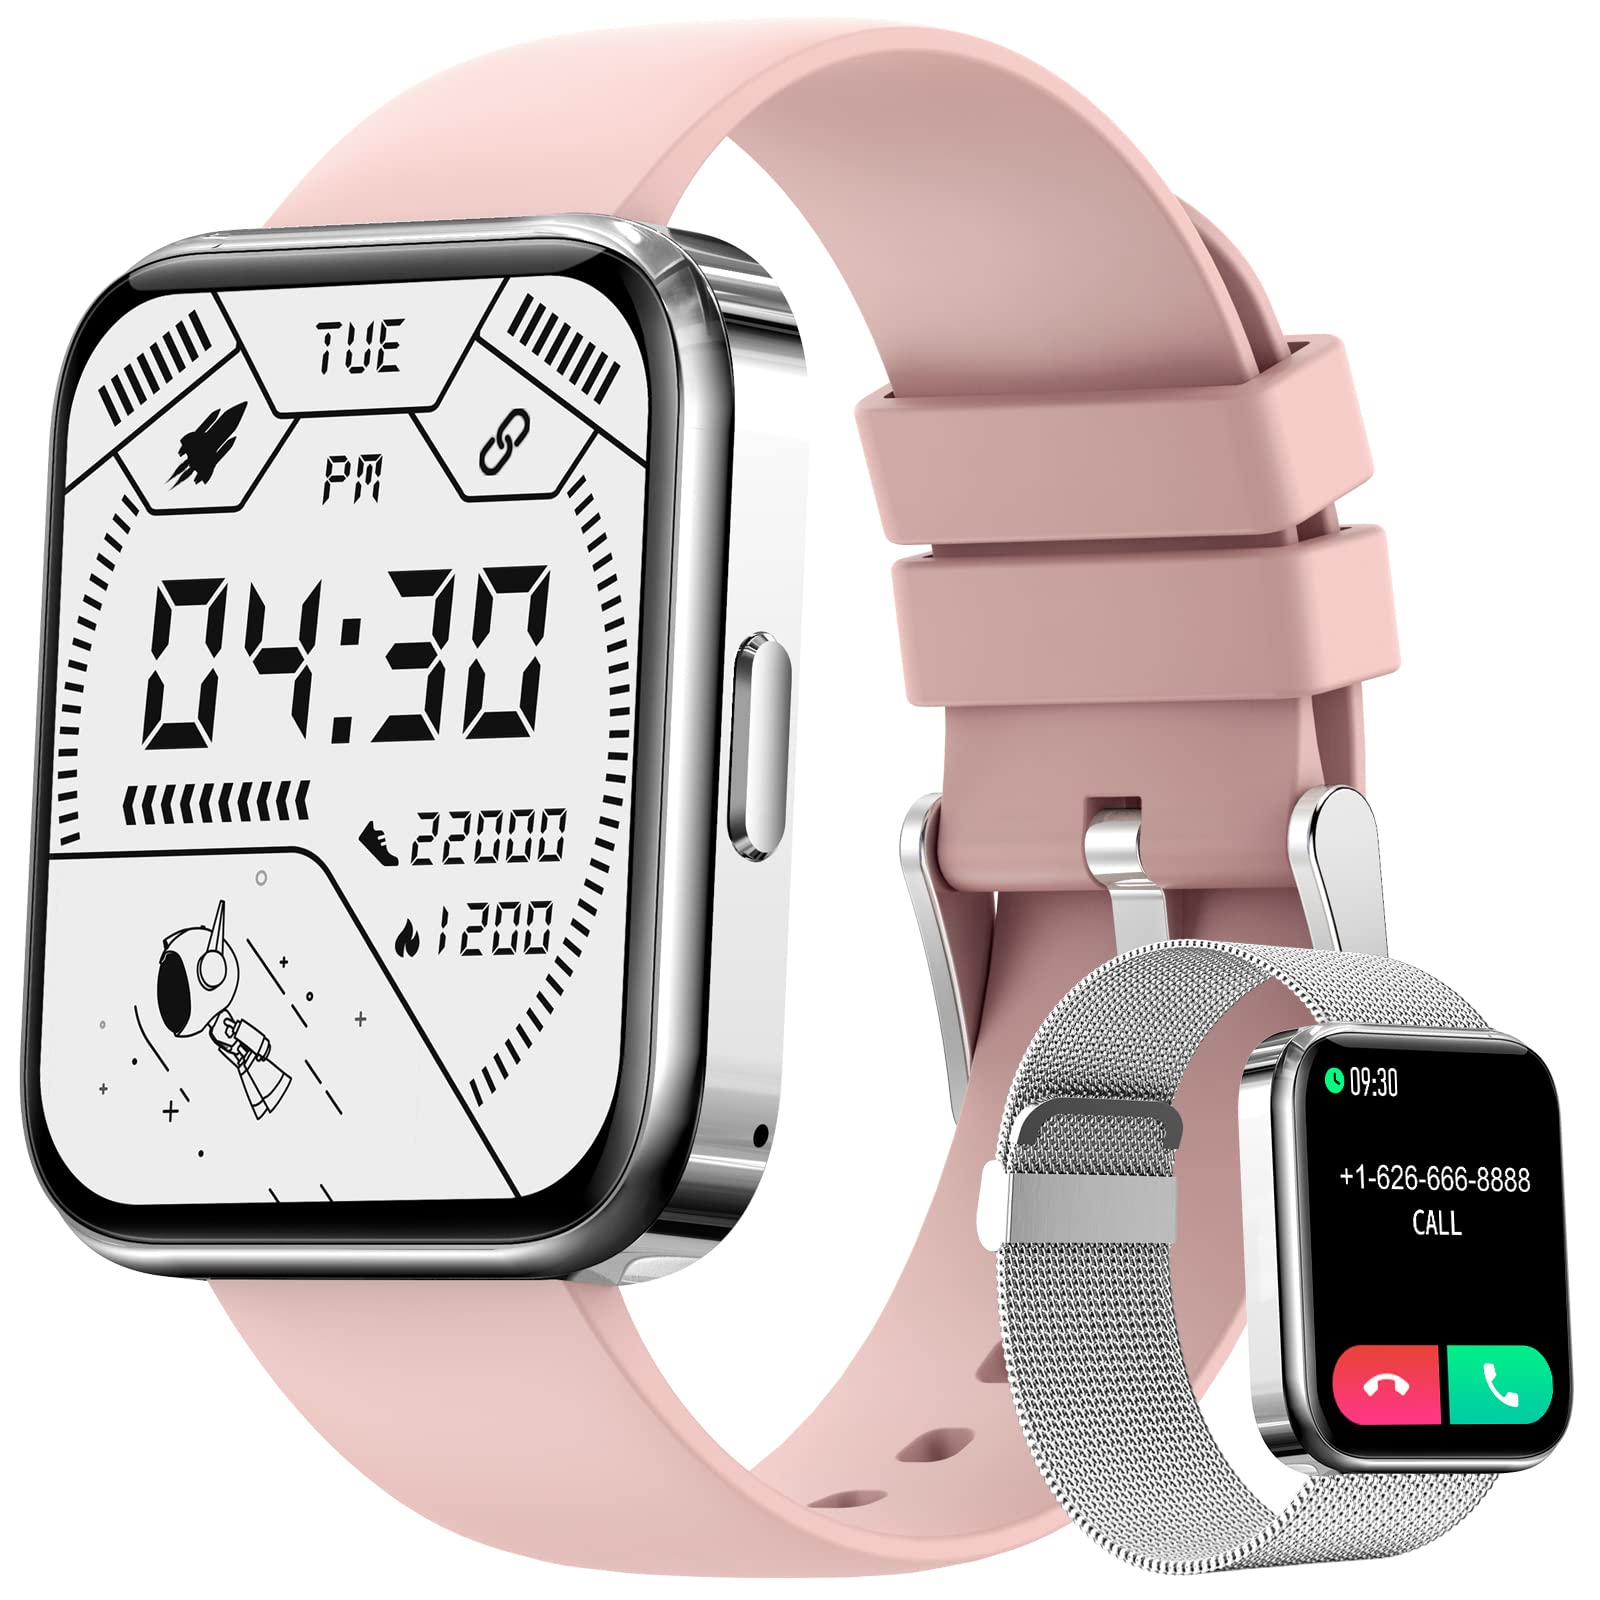 LIGE Smart Watch for Women with Call Receive/Dial, 1.69